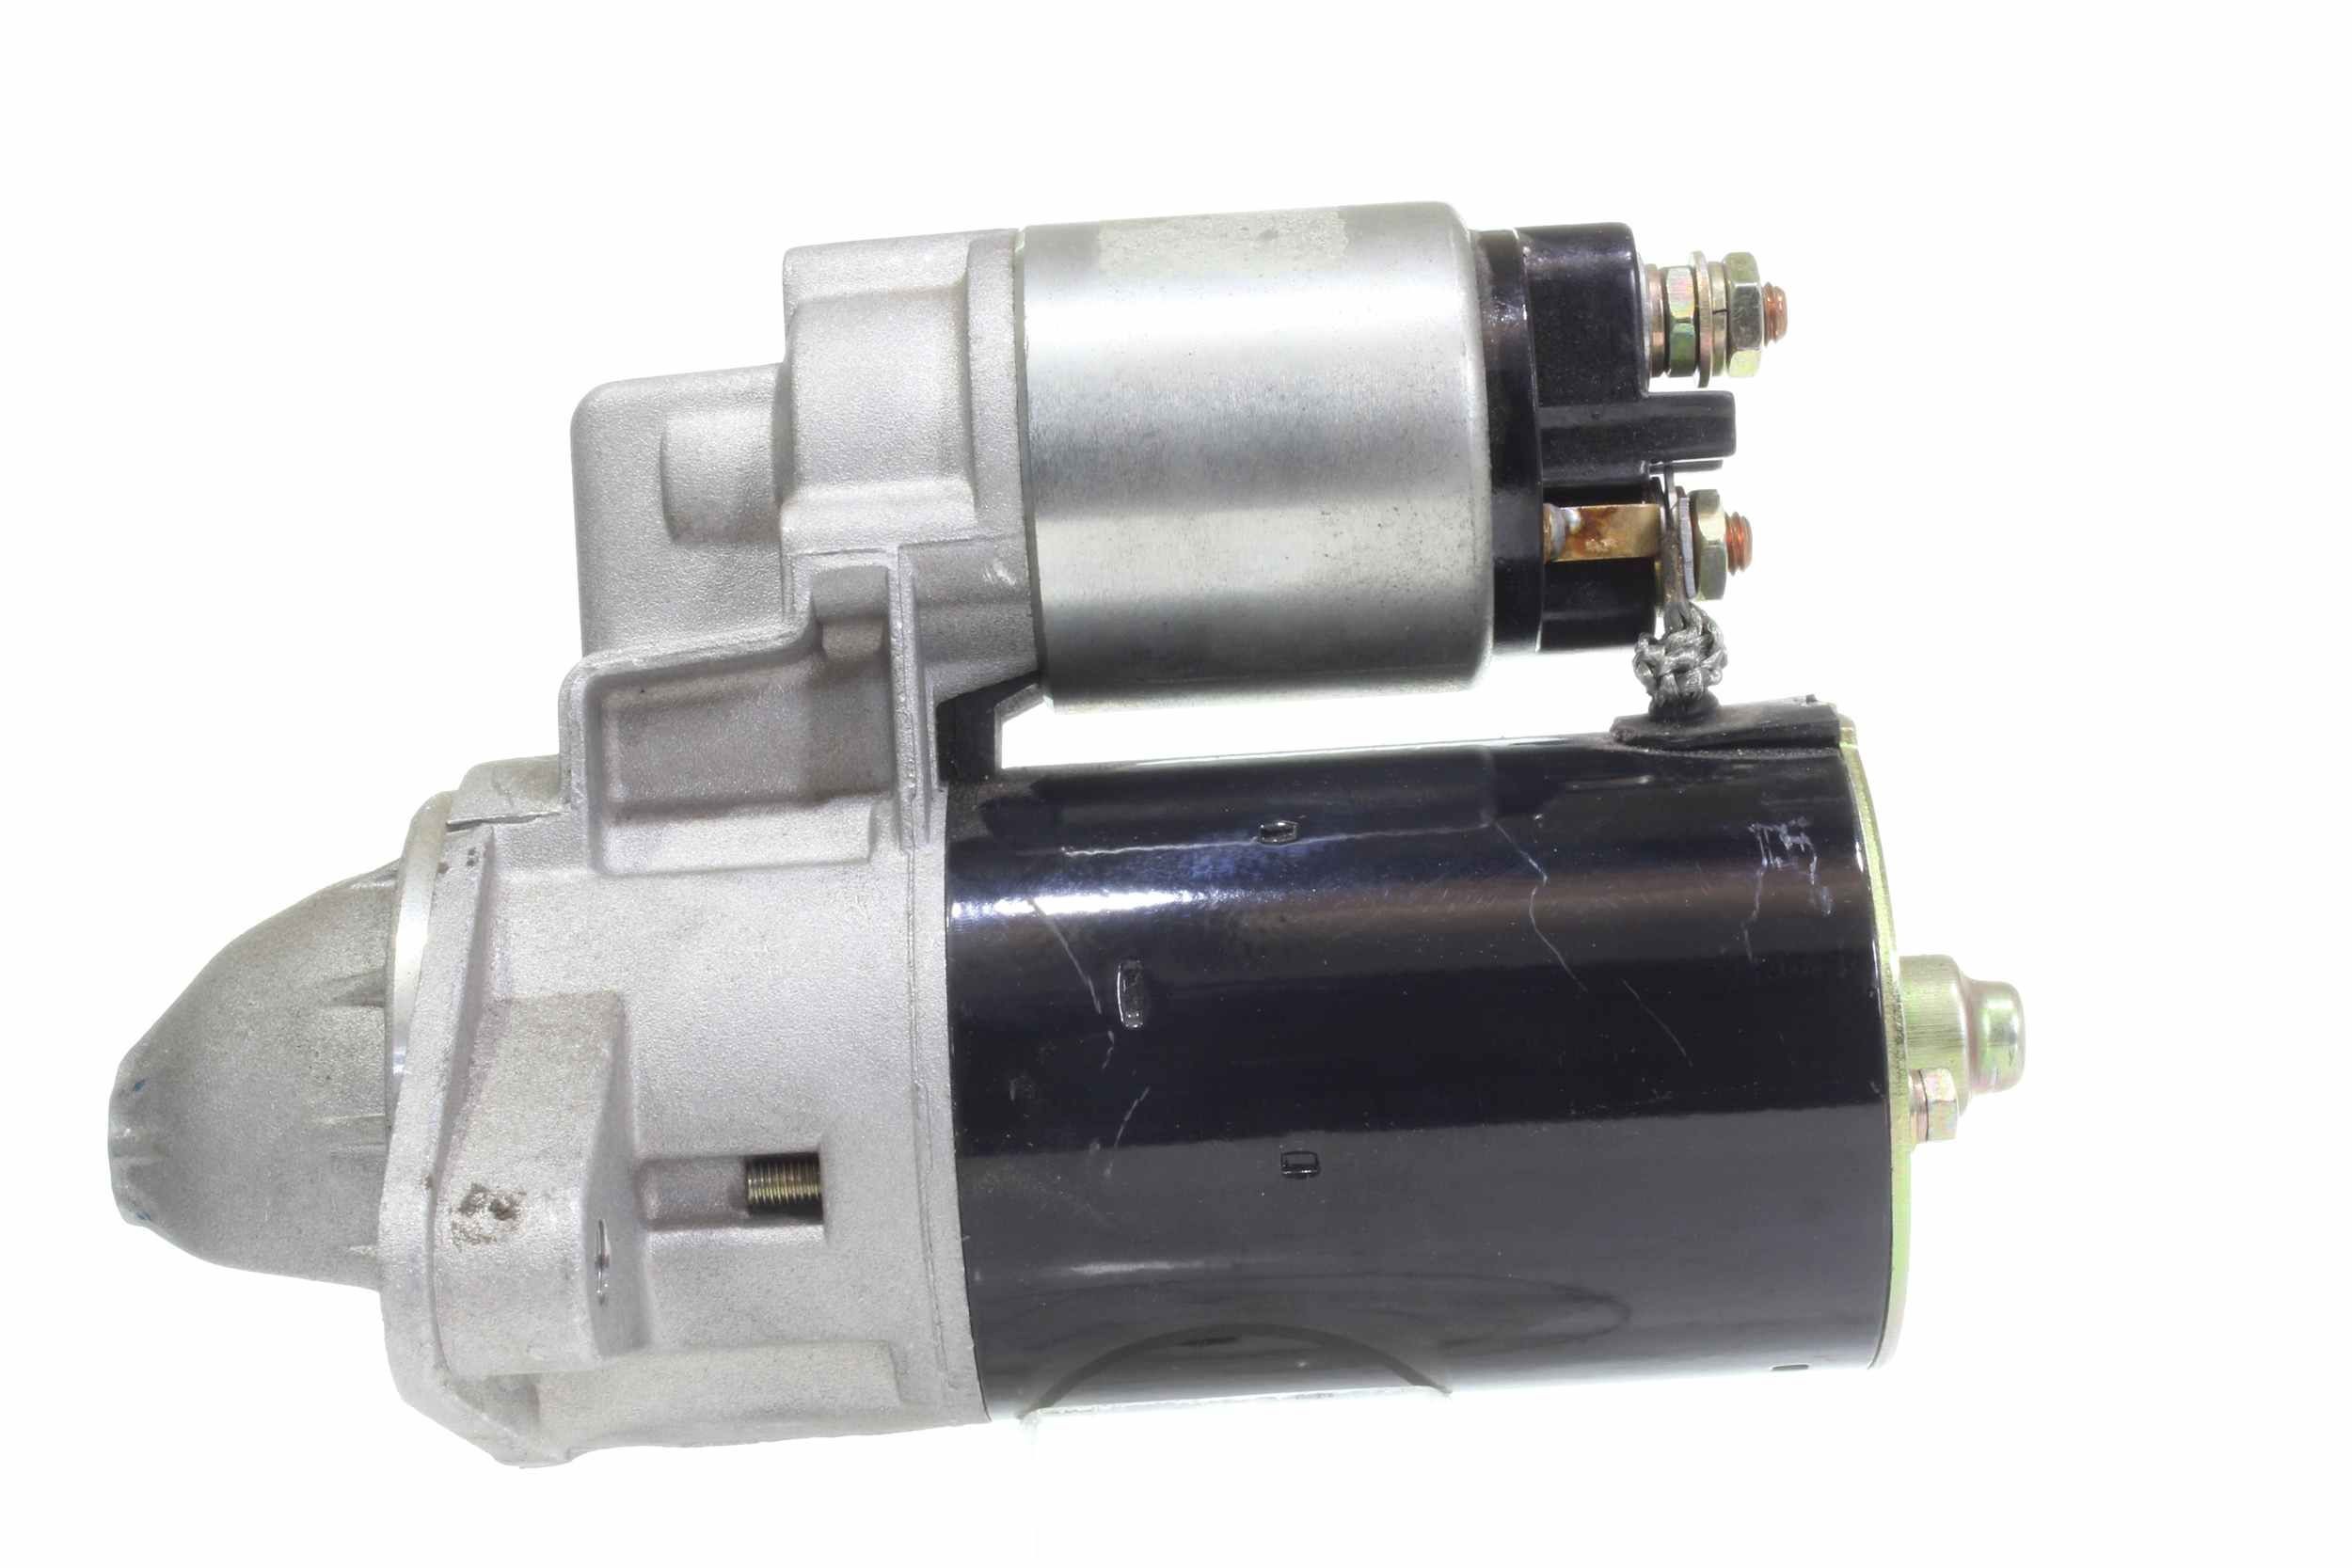 10440512 Engine starter motor ALANKO RNL1937 review and test